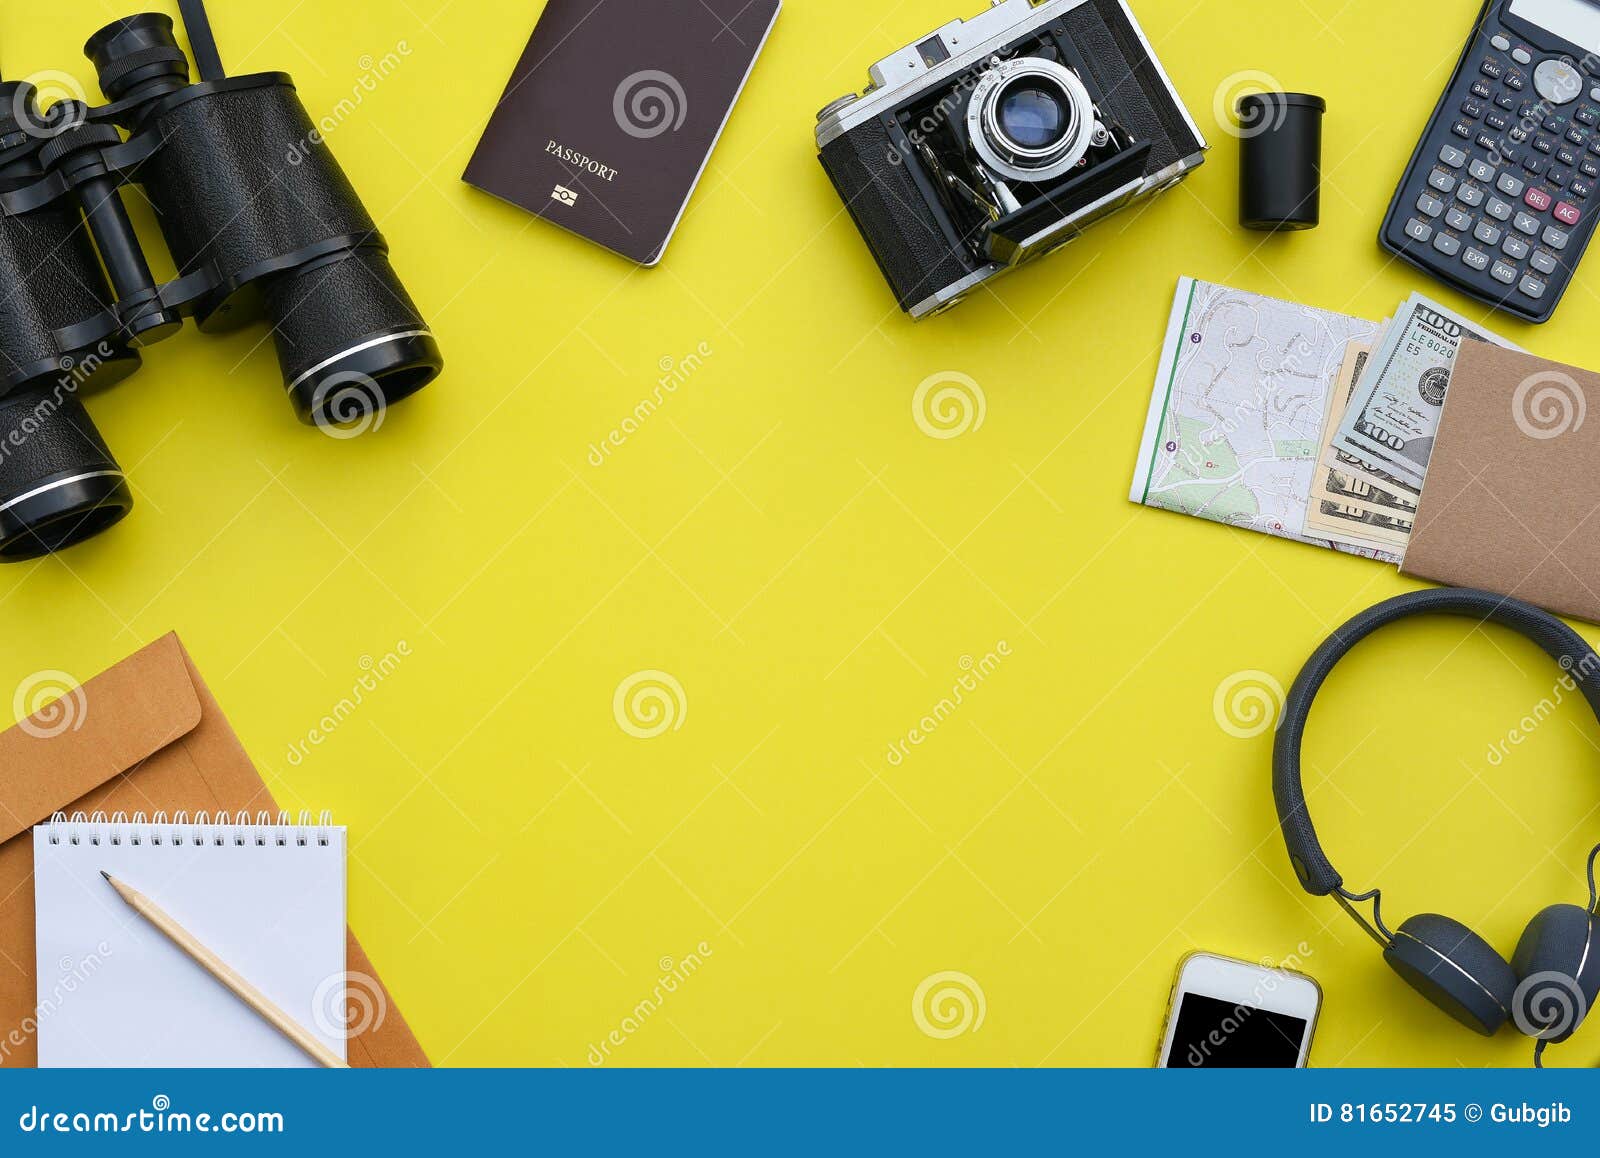 Accessories On Yellow Desk Background Of Photographer Stock Image